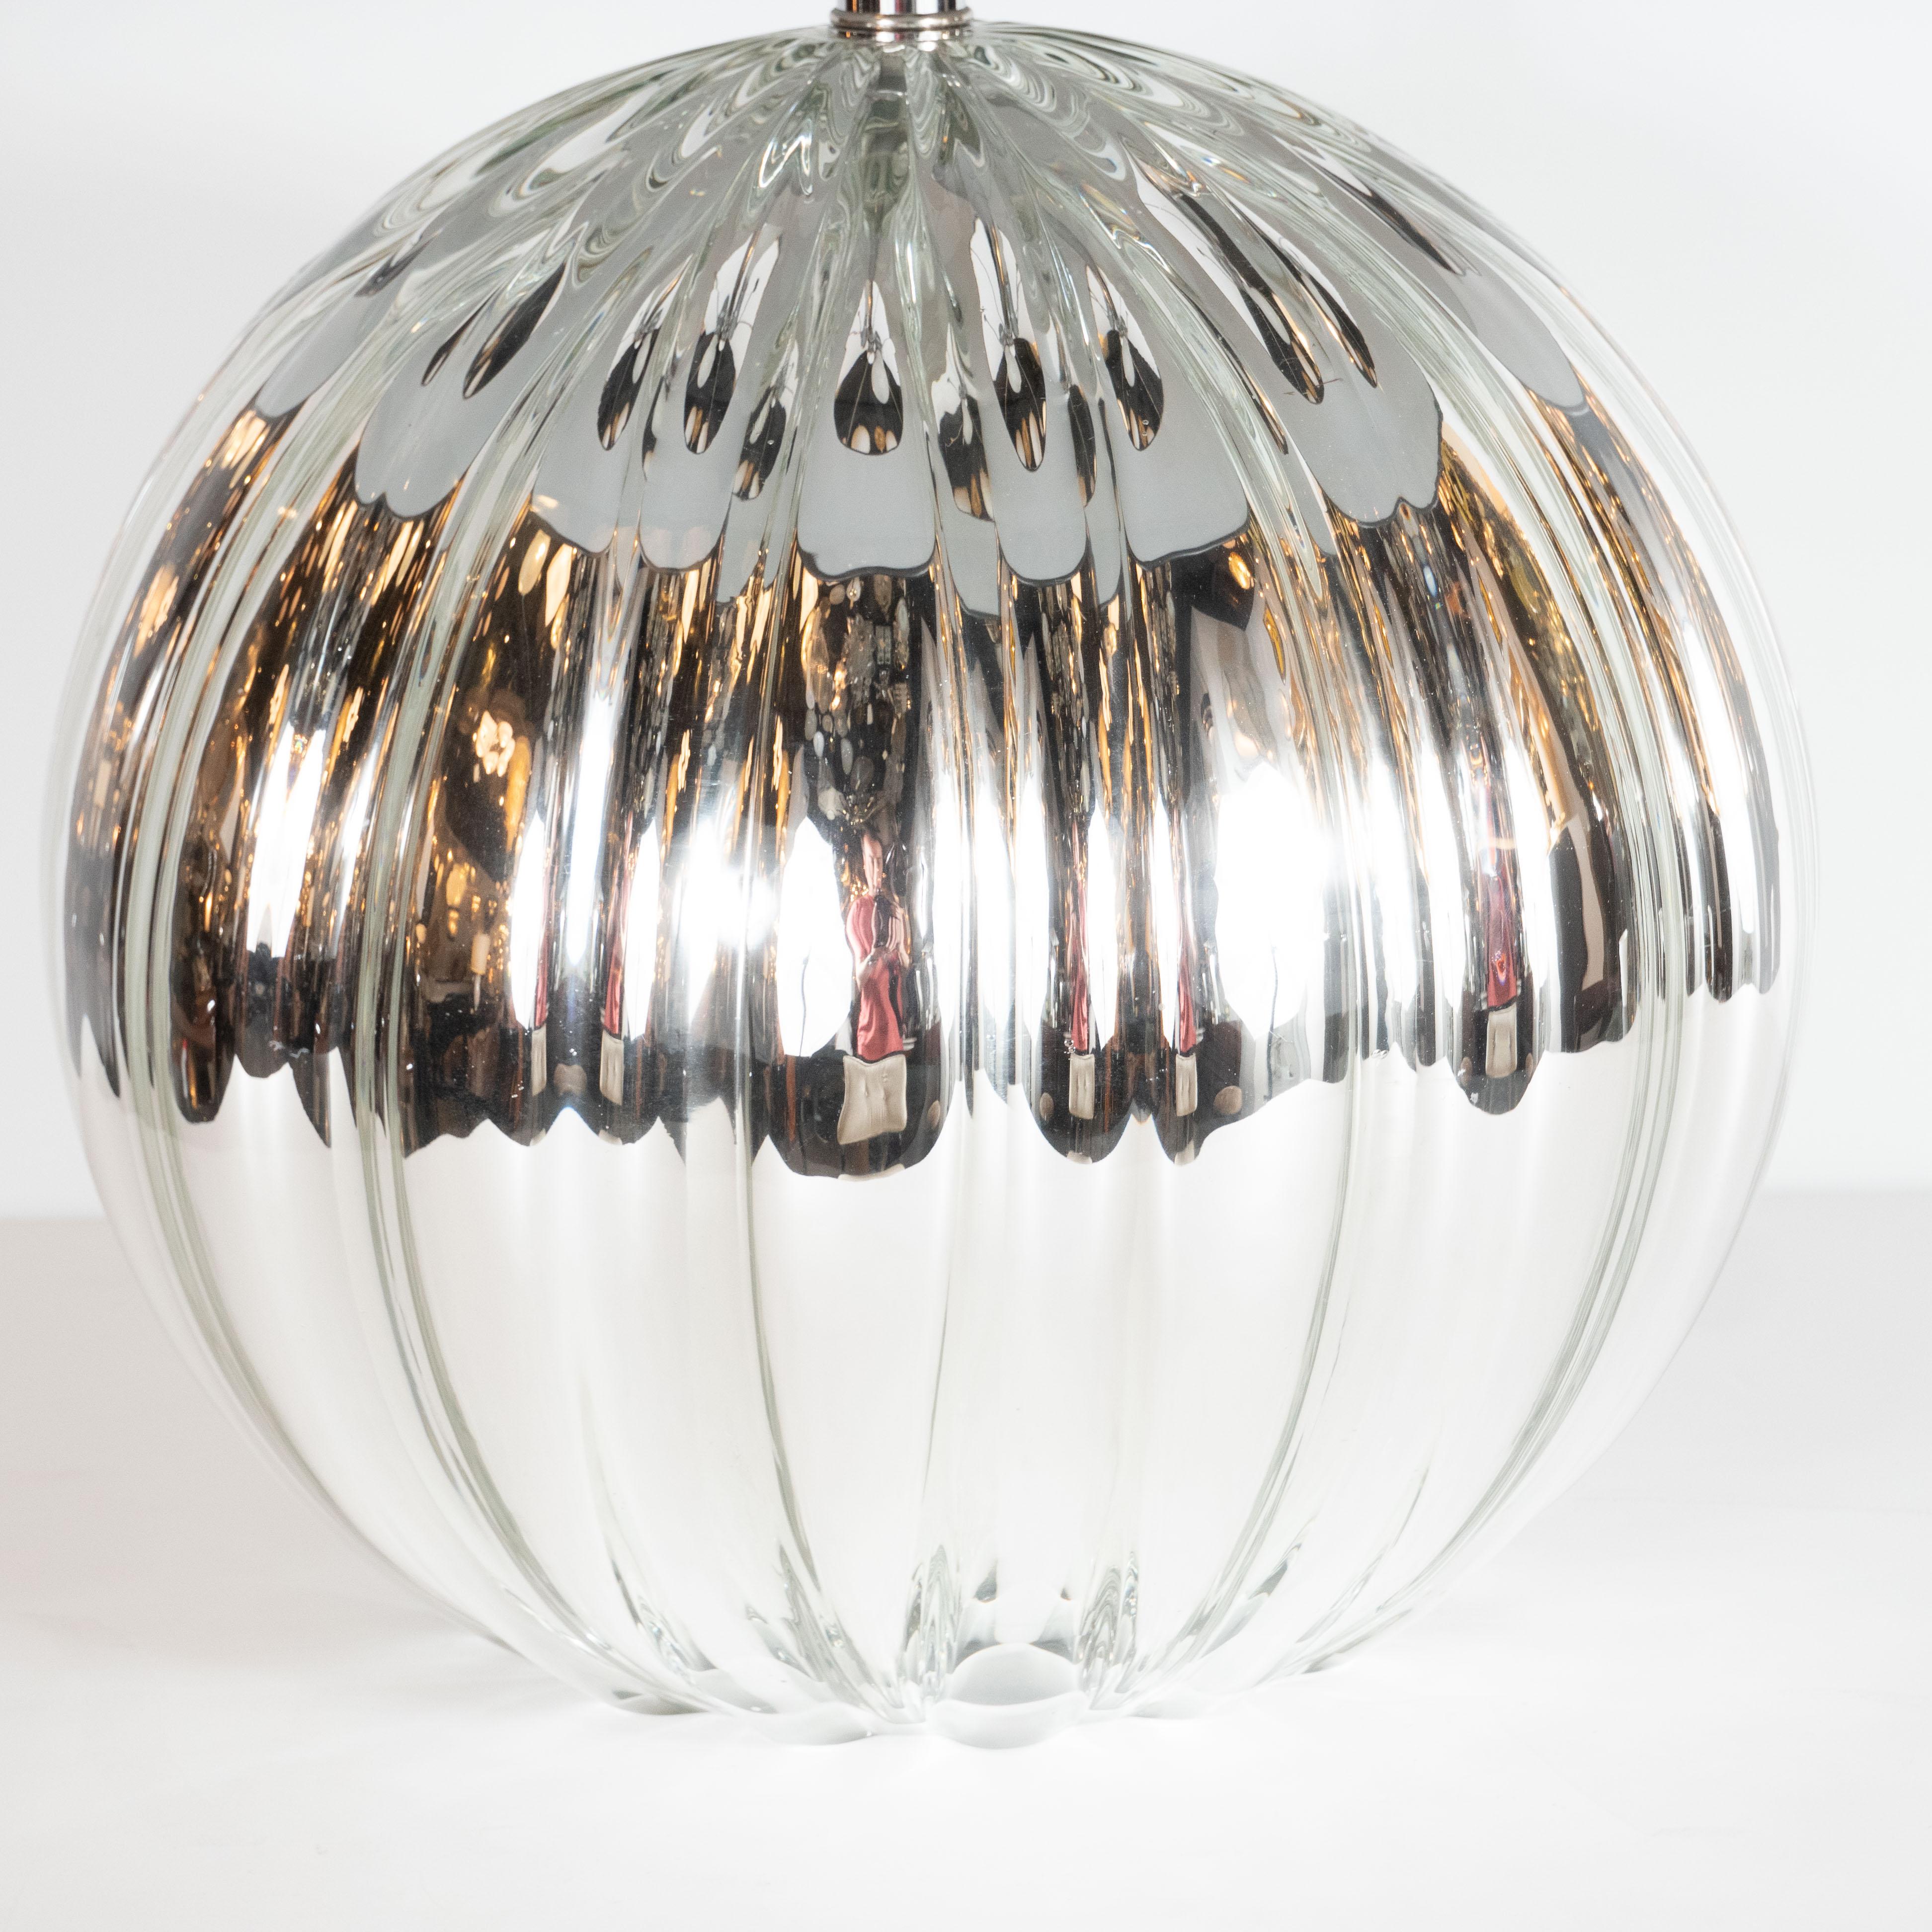 This gorgeous pair of table lamps were realized in Murano, Italy- the island off the coast of Venice renowned for centuries for its superlative glass products. Hand blown by artisans in lustrous and highly reflective Mercury, these lamps suggest